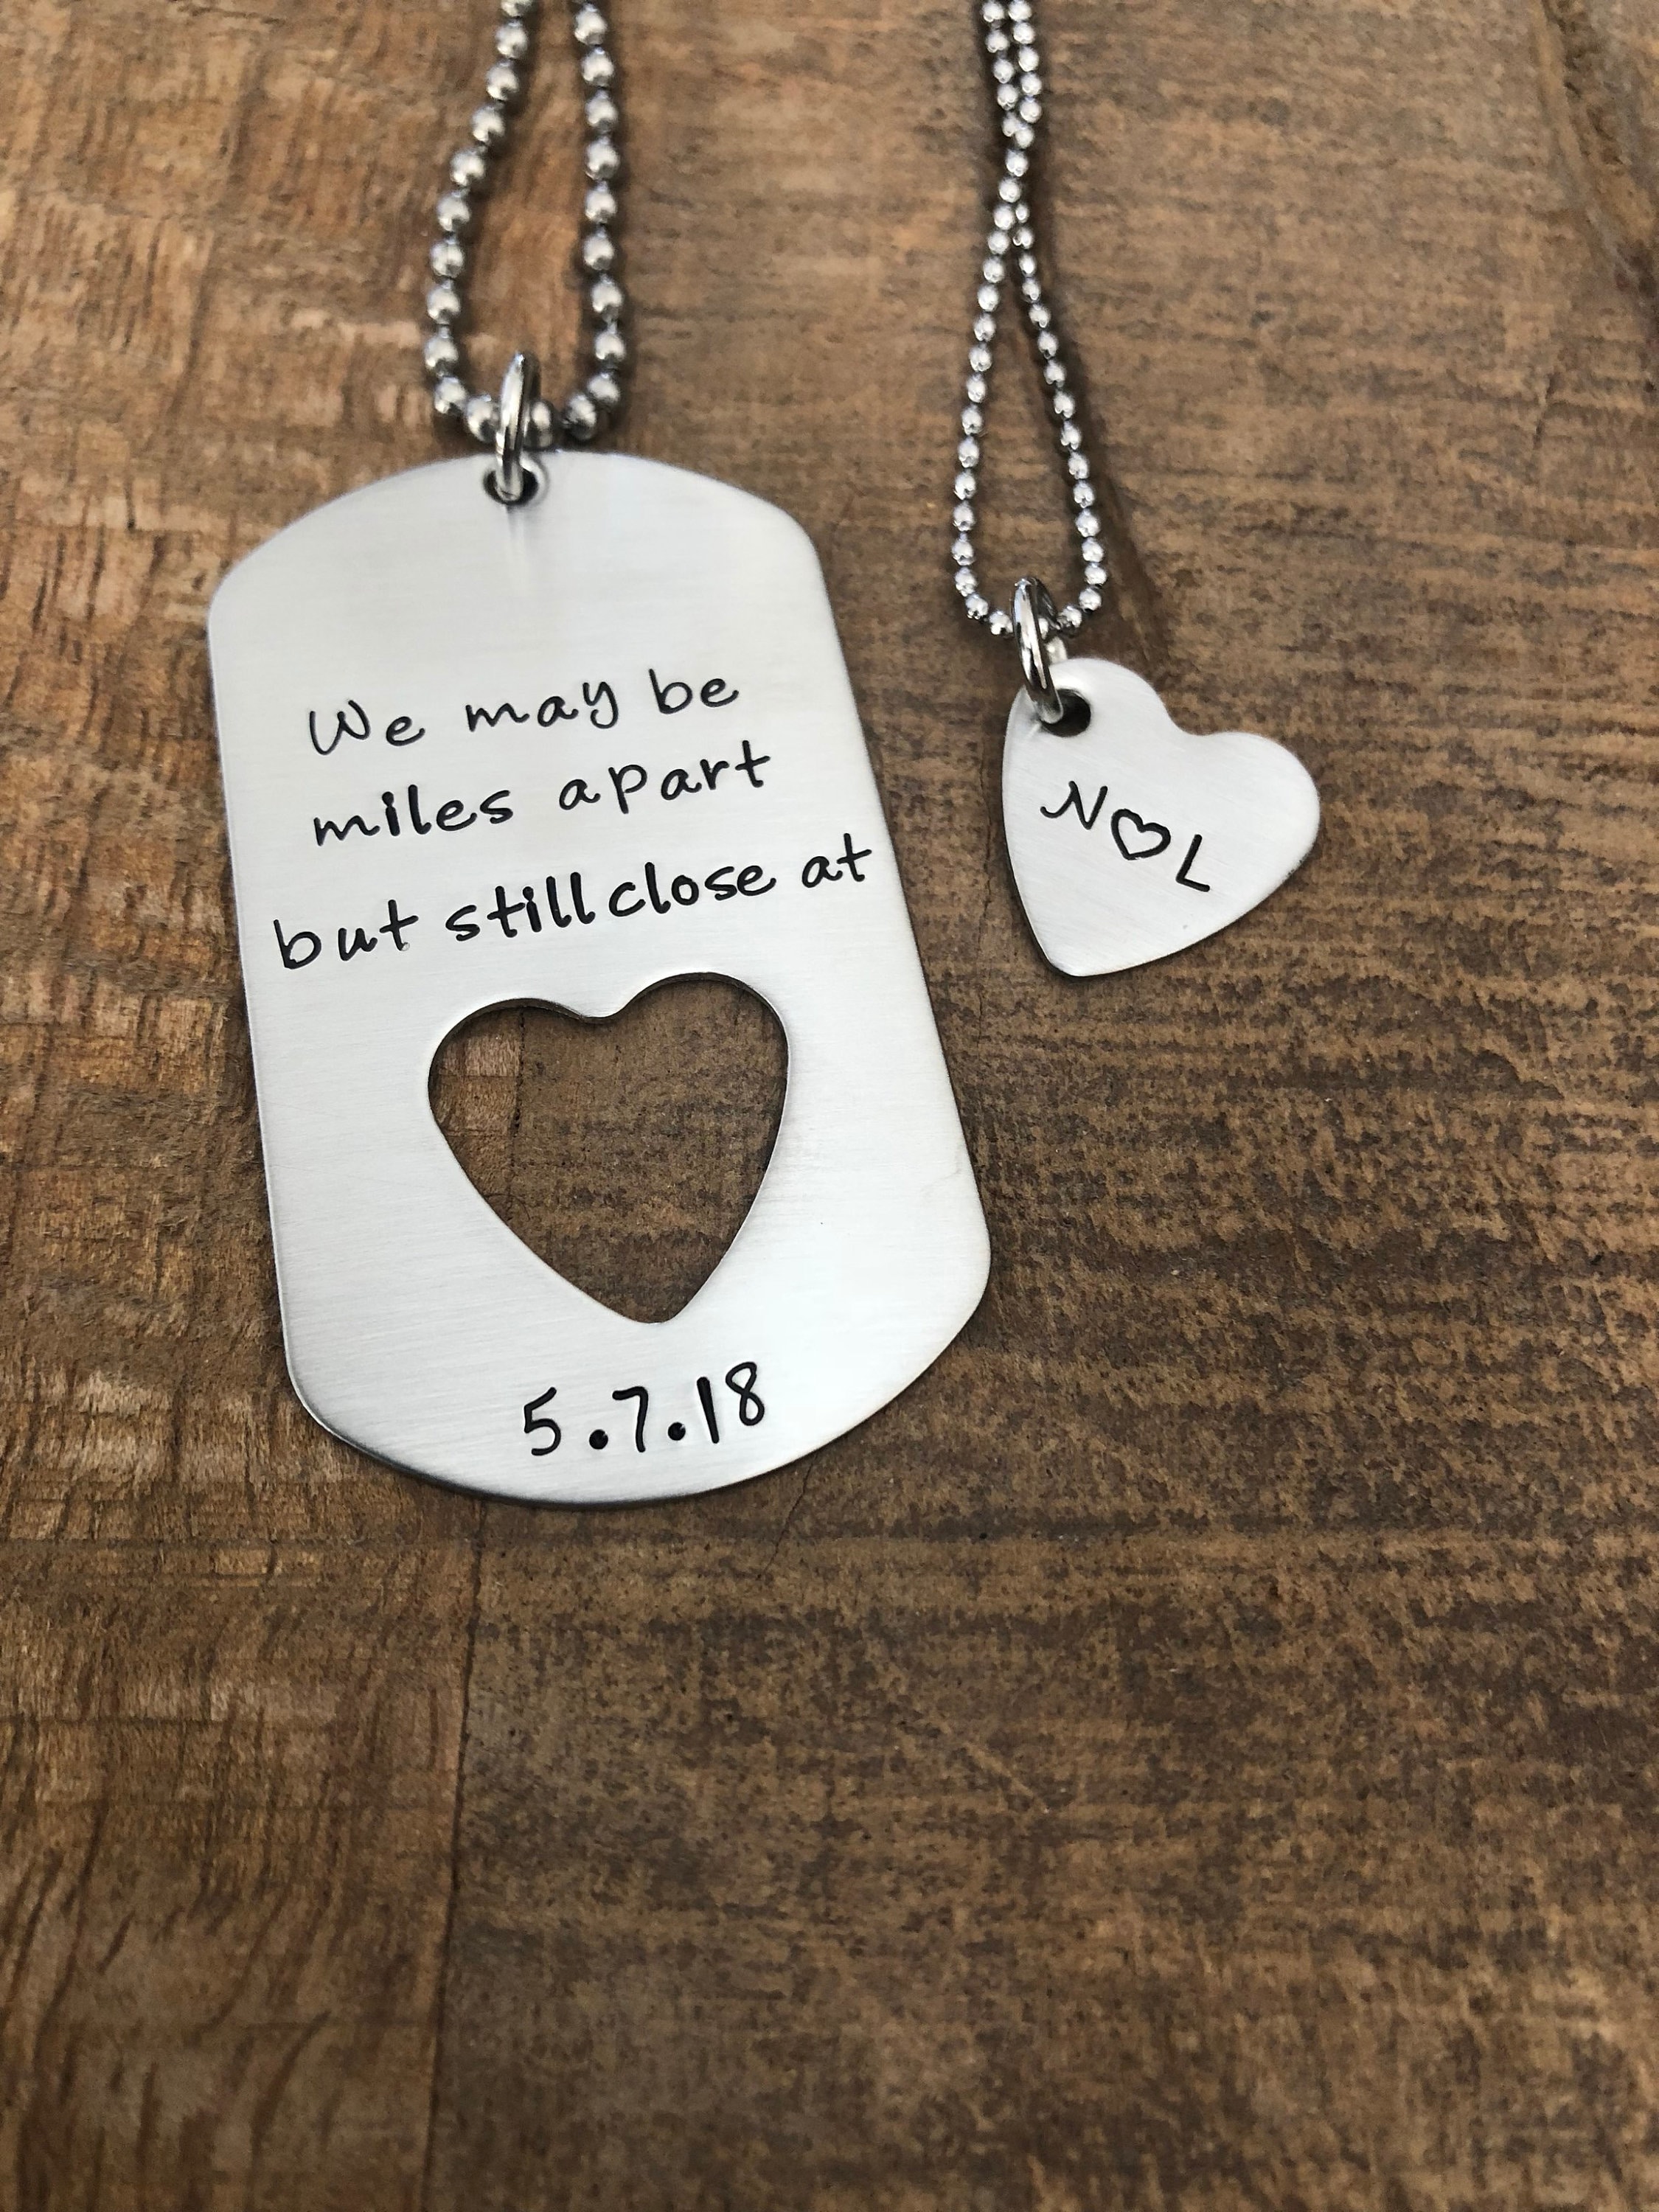 1 Year Anniversary Gift for Boyfriend | Anniversary Gifts for Boyfriend 1 Year | Photo Upload Dog Tag Necklace Luxury Dog Tag with Military Chain (